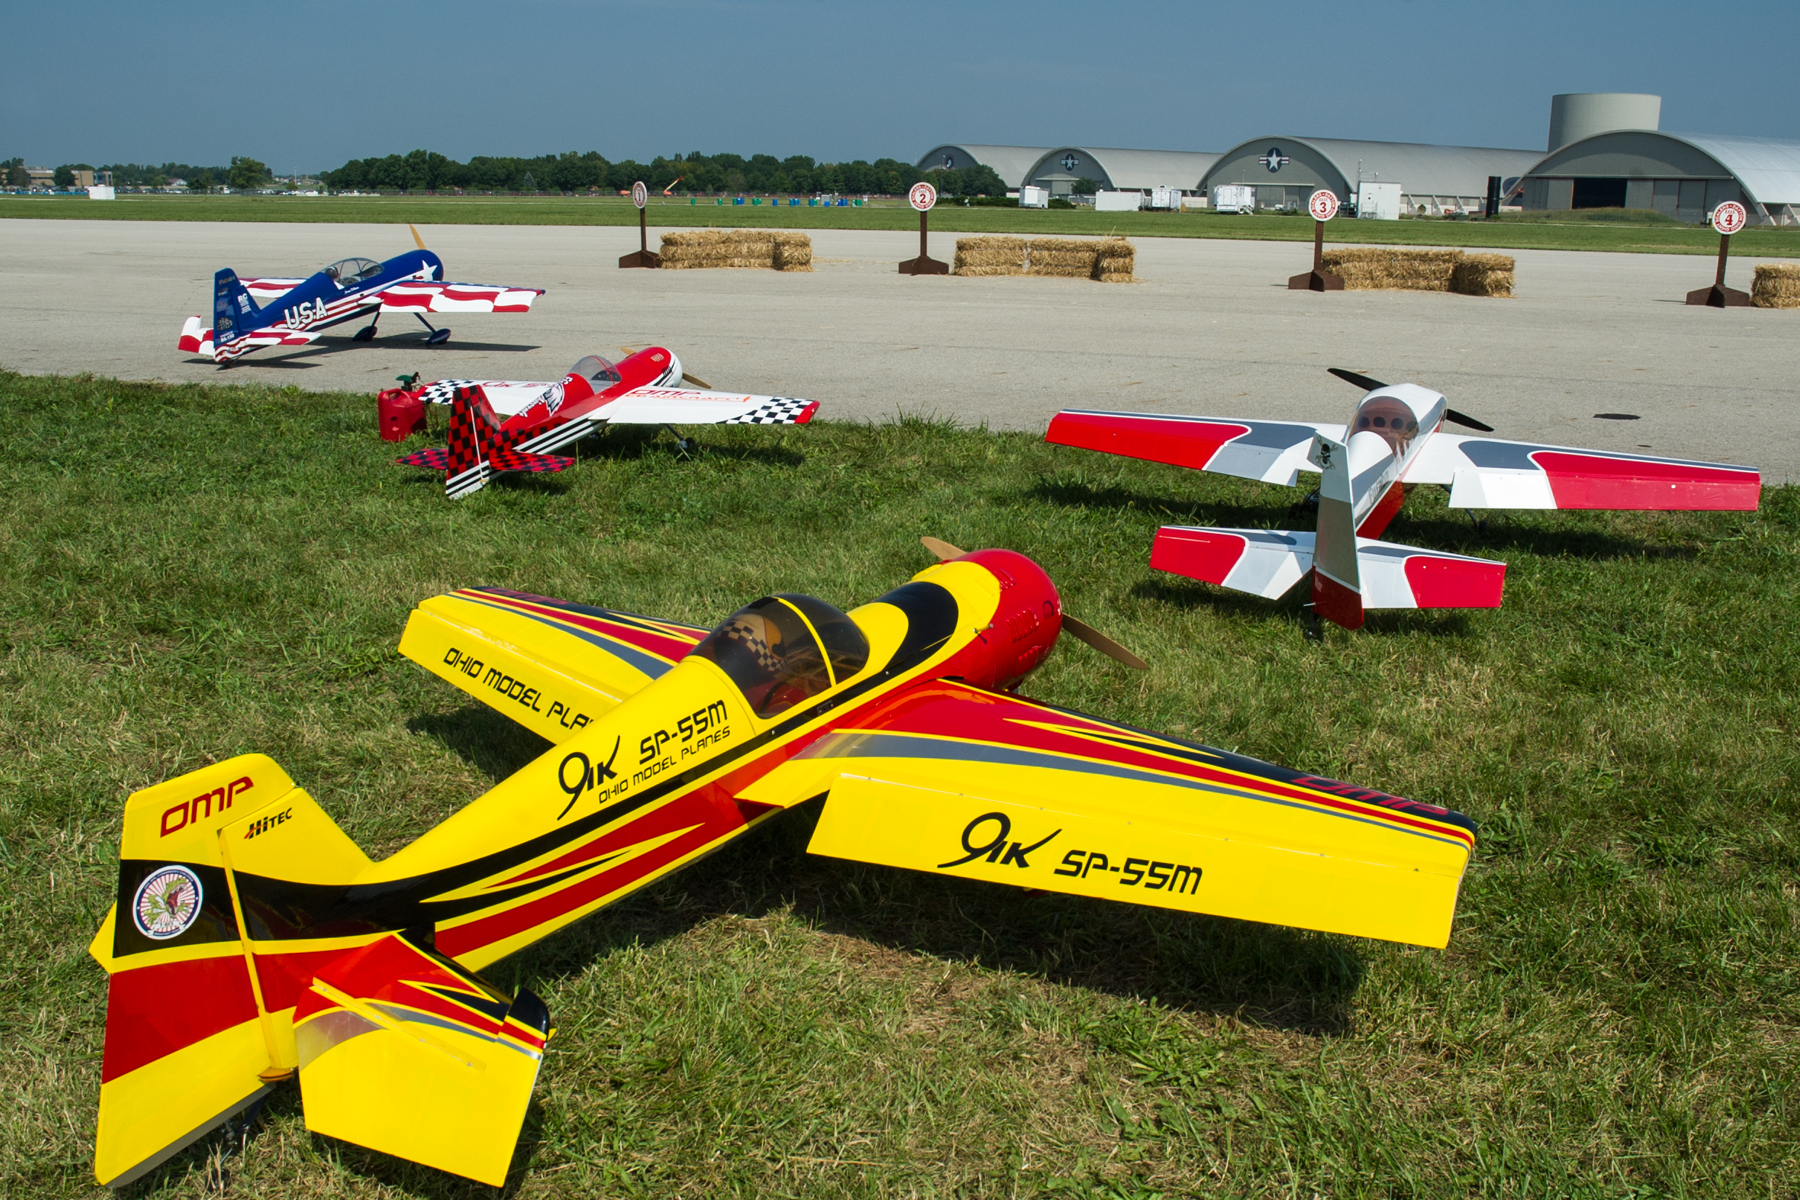 giant model aircraft